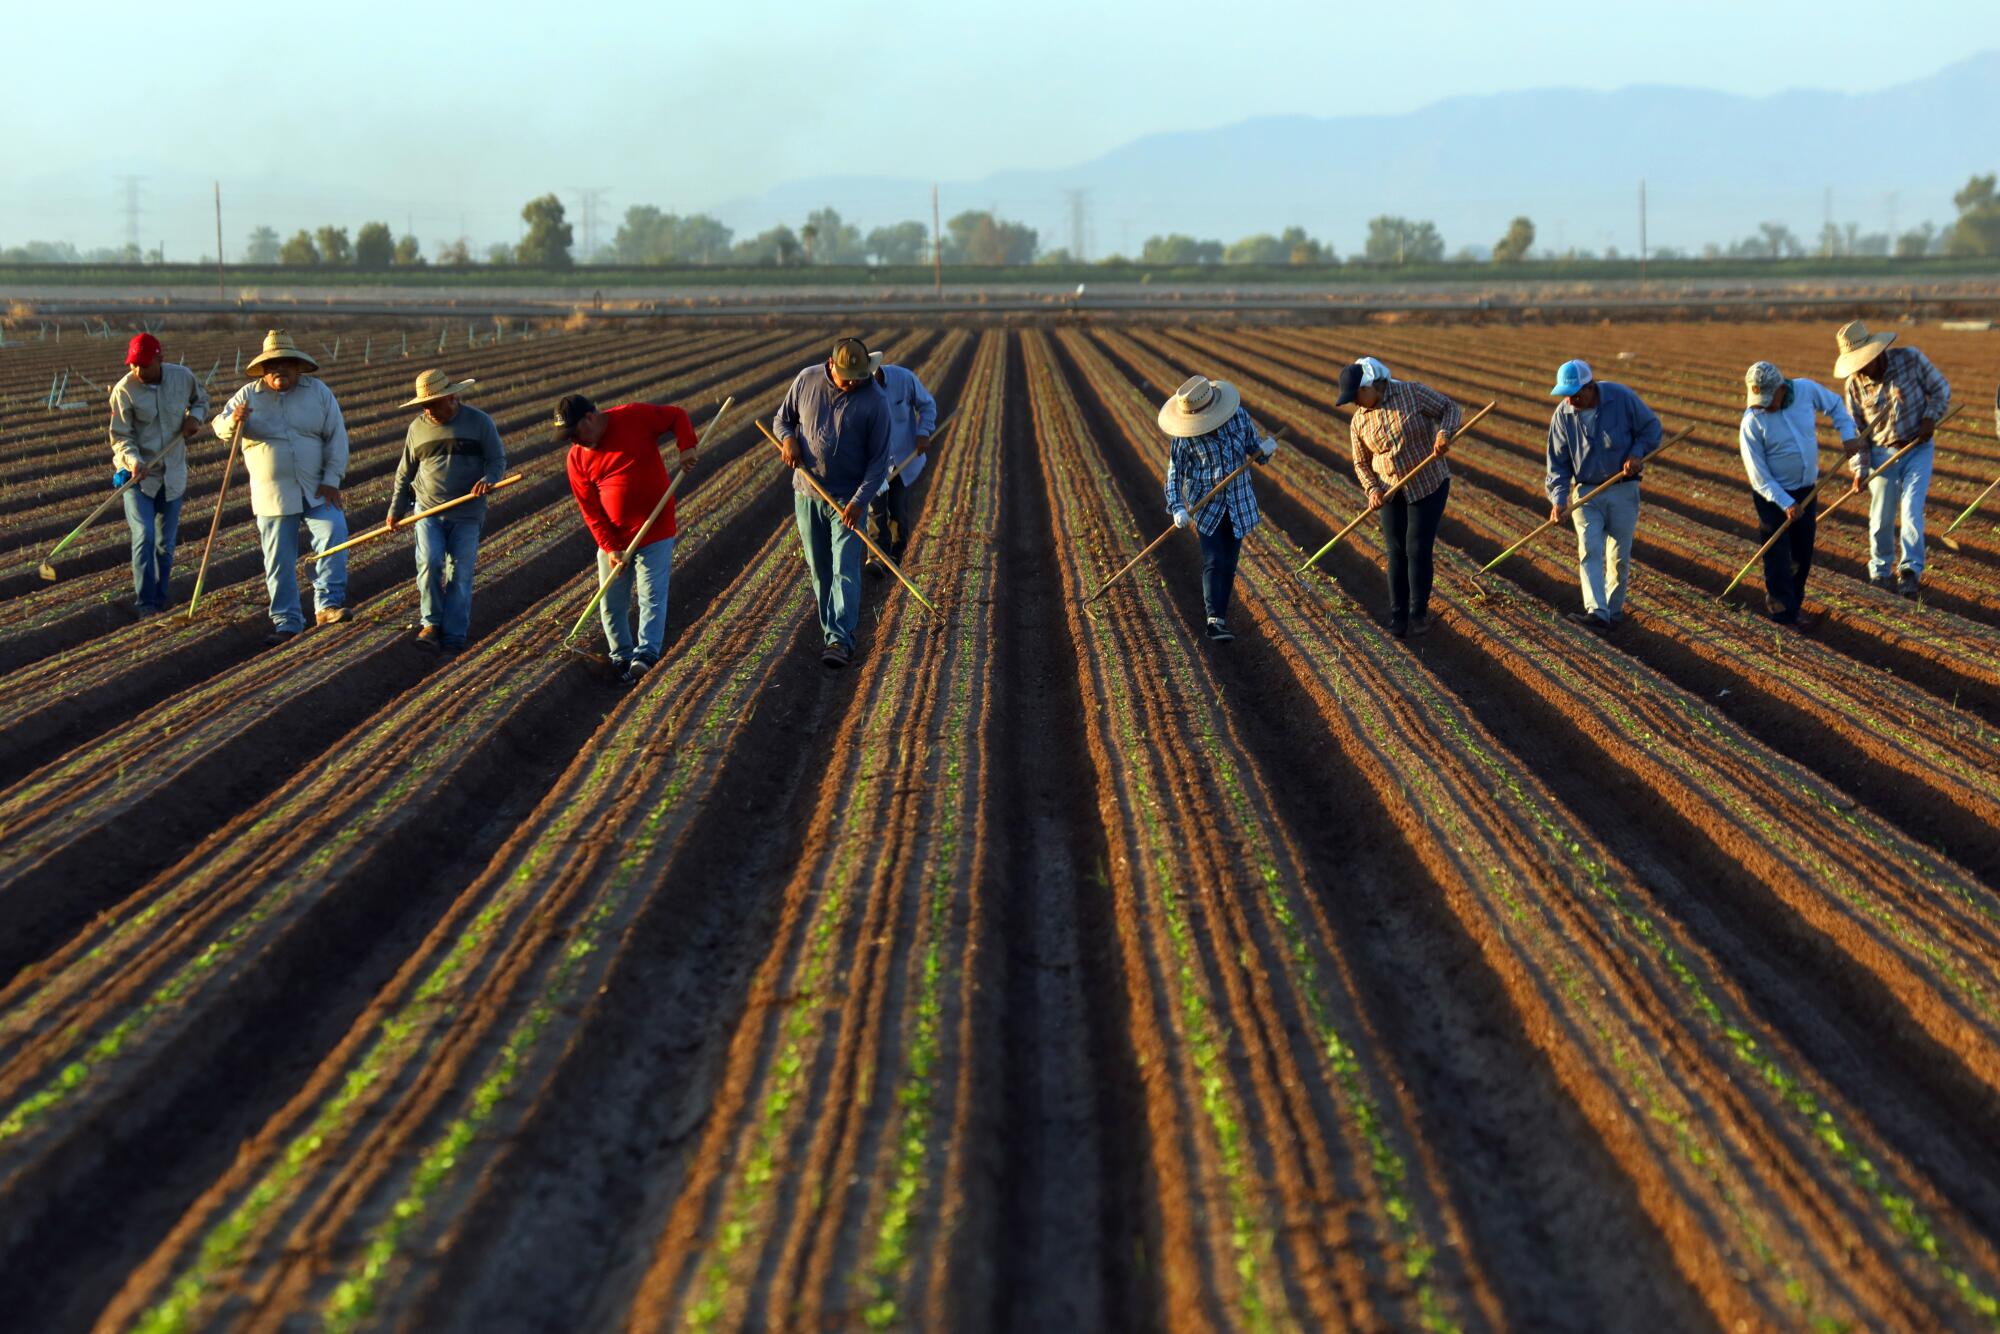 Farmworkers weed rows of romaine lettuce.